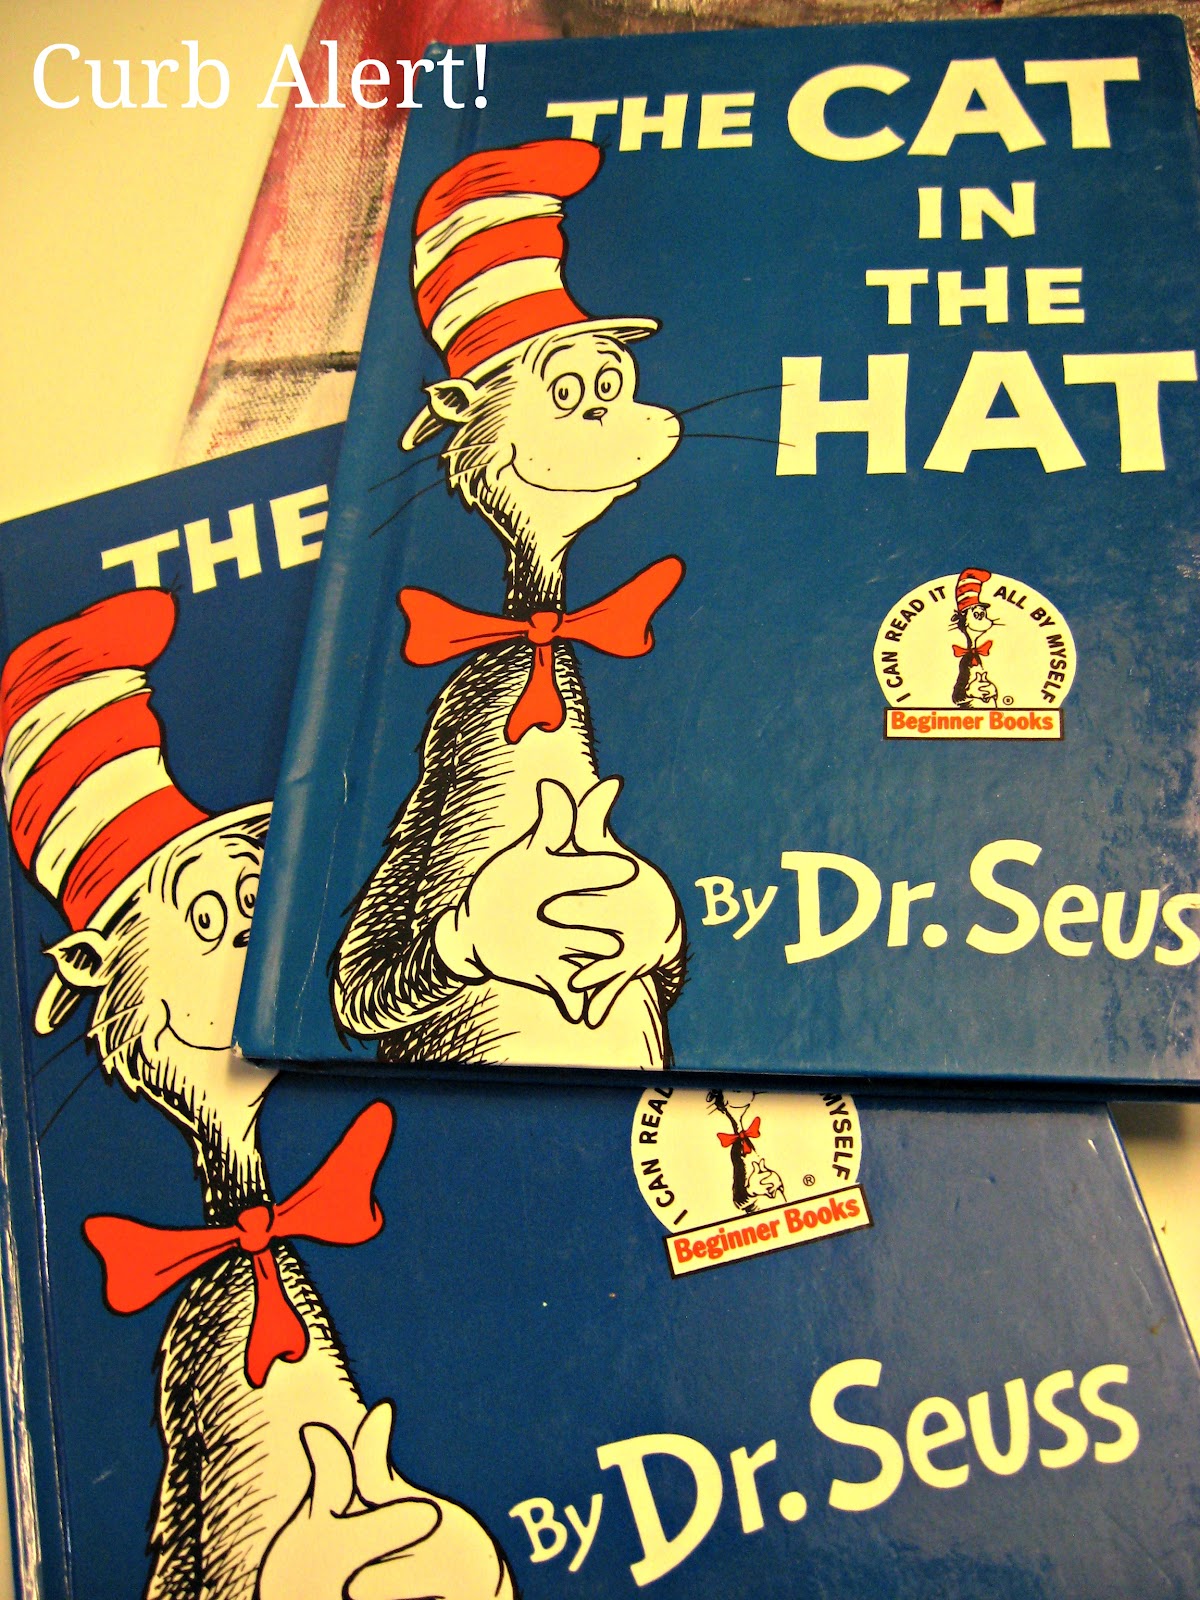 Curb Alert! : Angry Men goes Dr. Seuss! {Book Page Canvas Art}